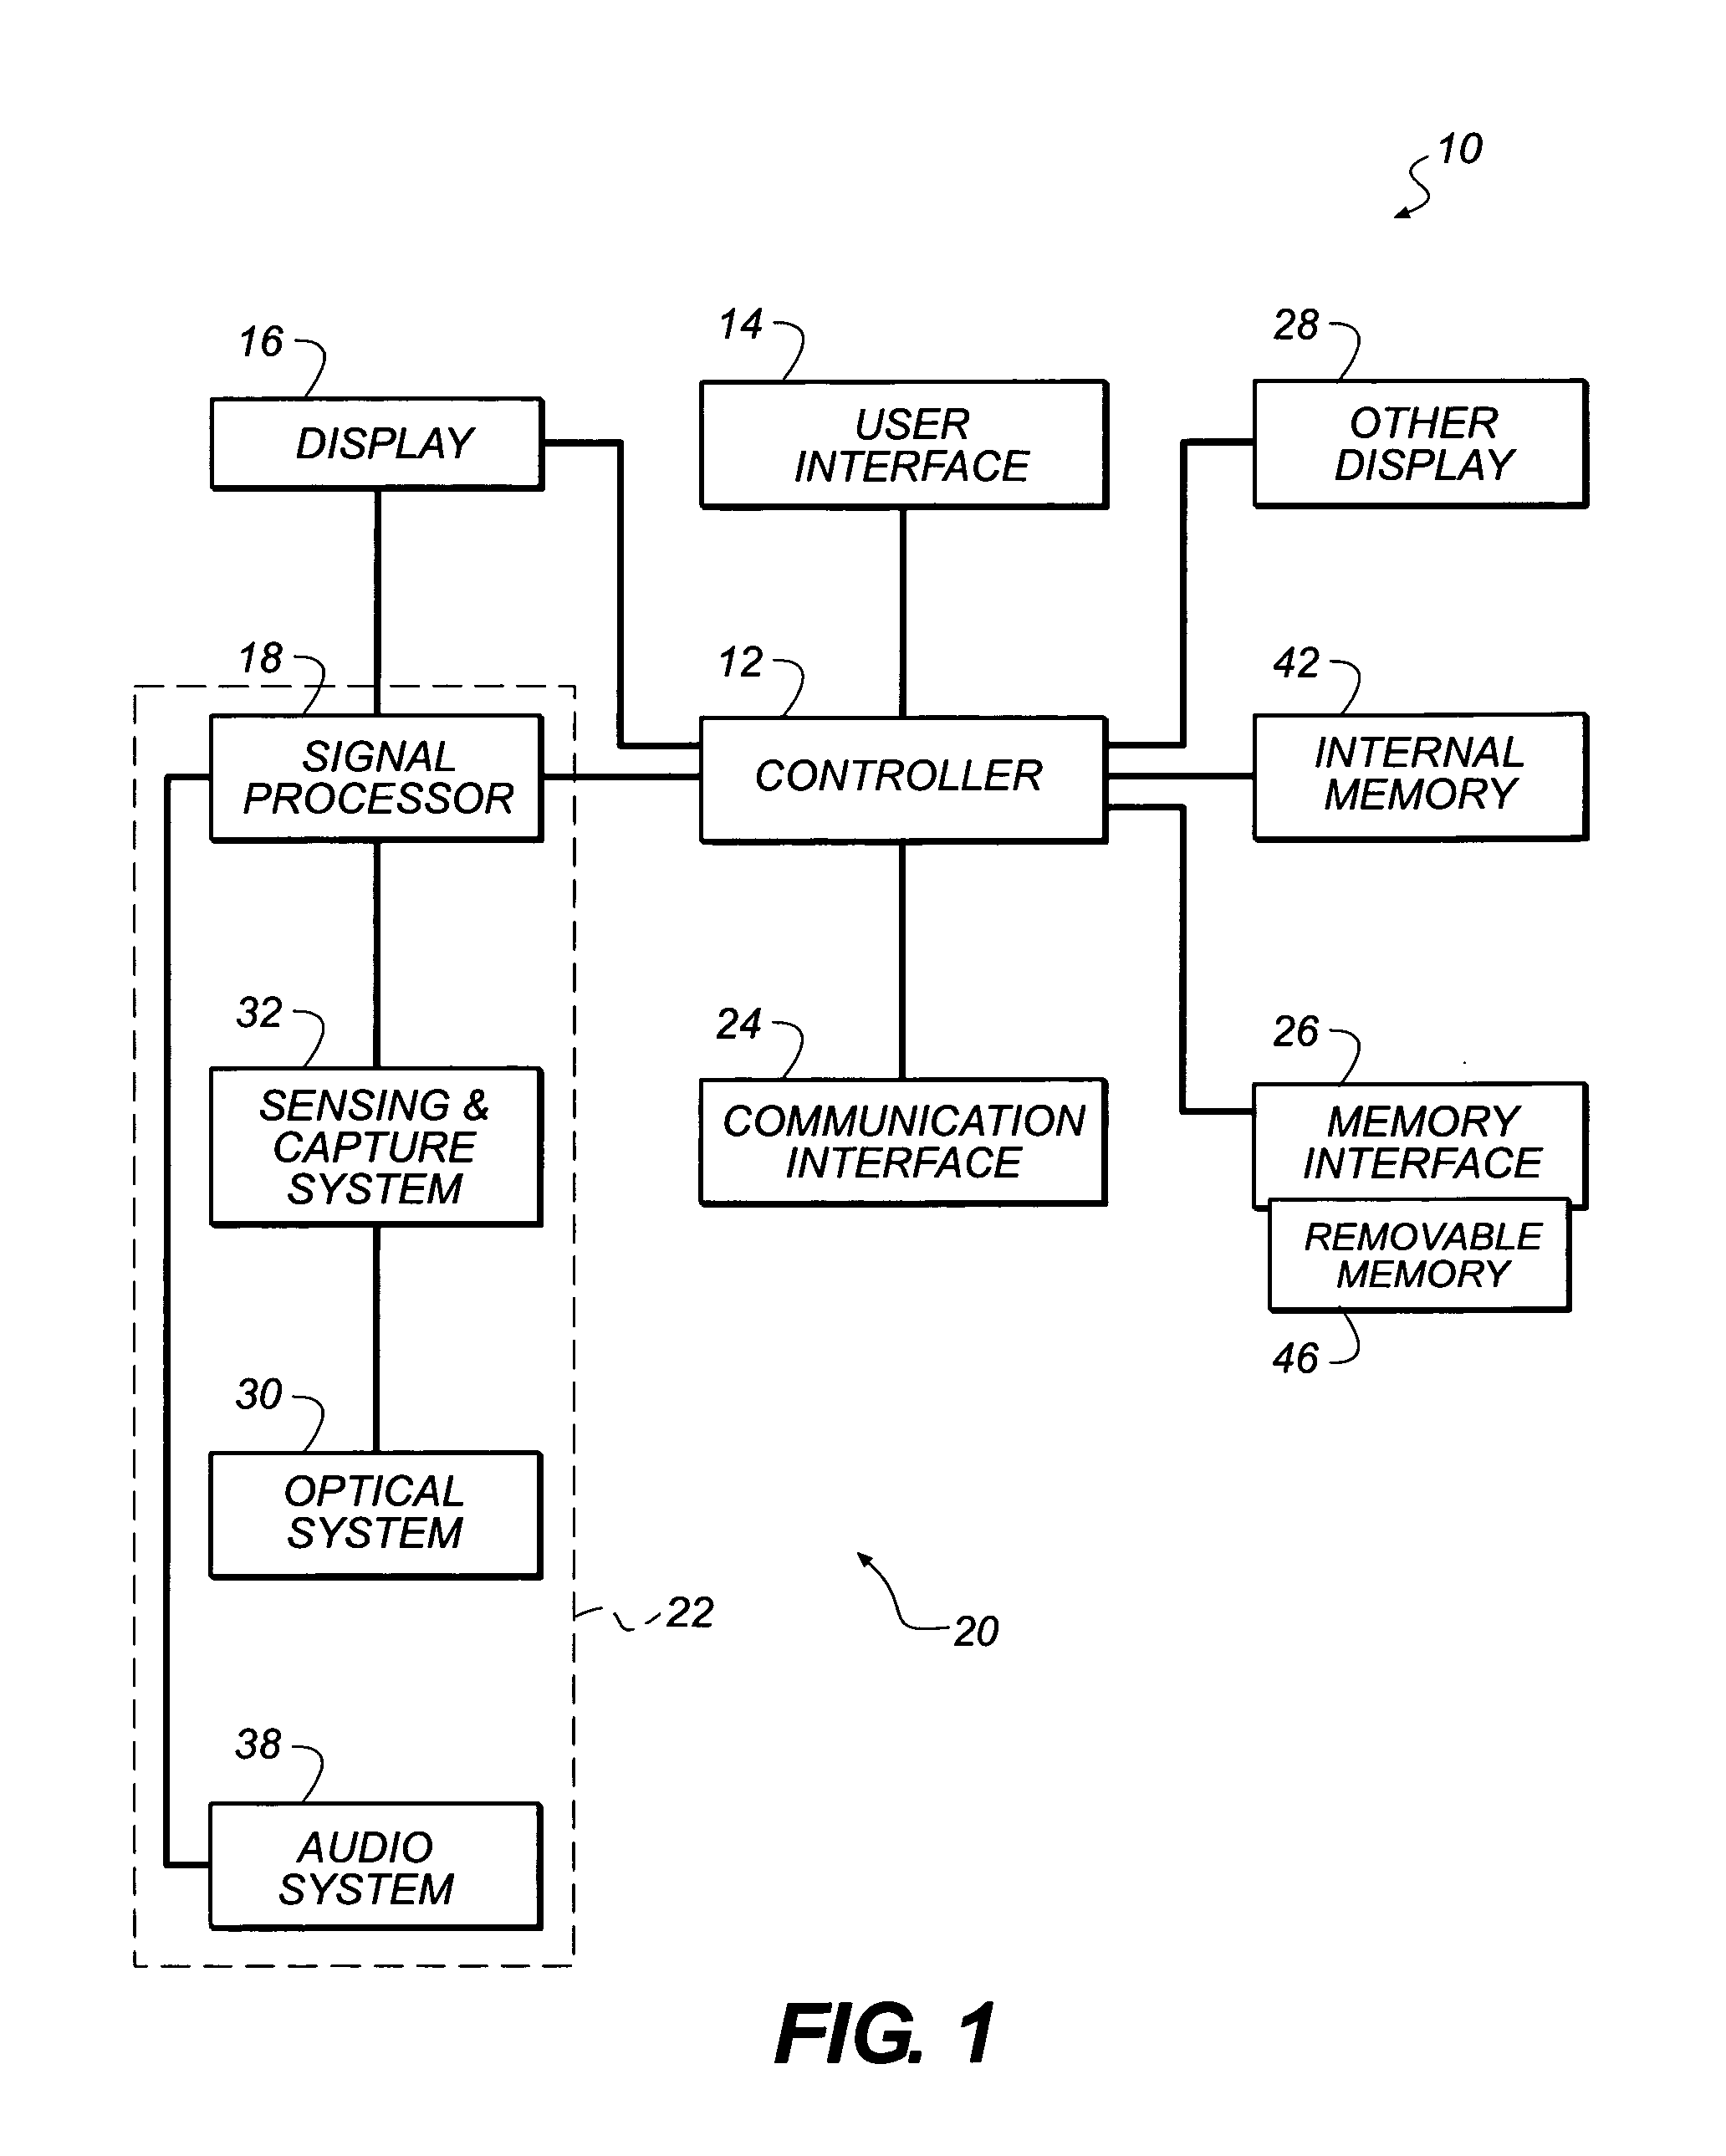 Display device and system